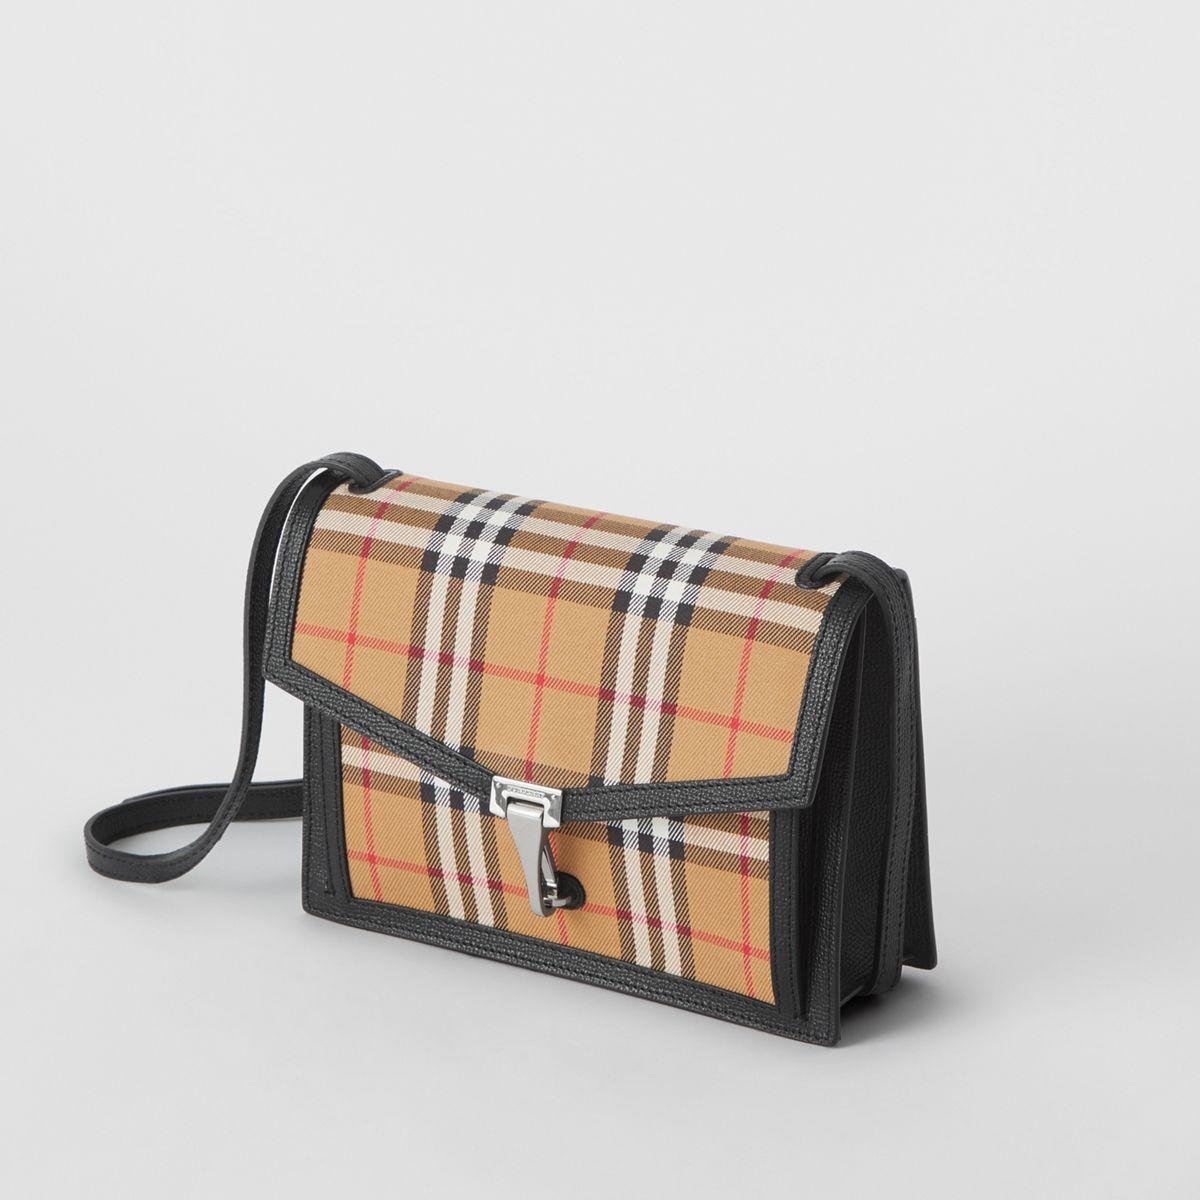 Burberry Small Vintage Check And Leather Crossbody Bag in Black - Lyst